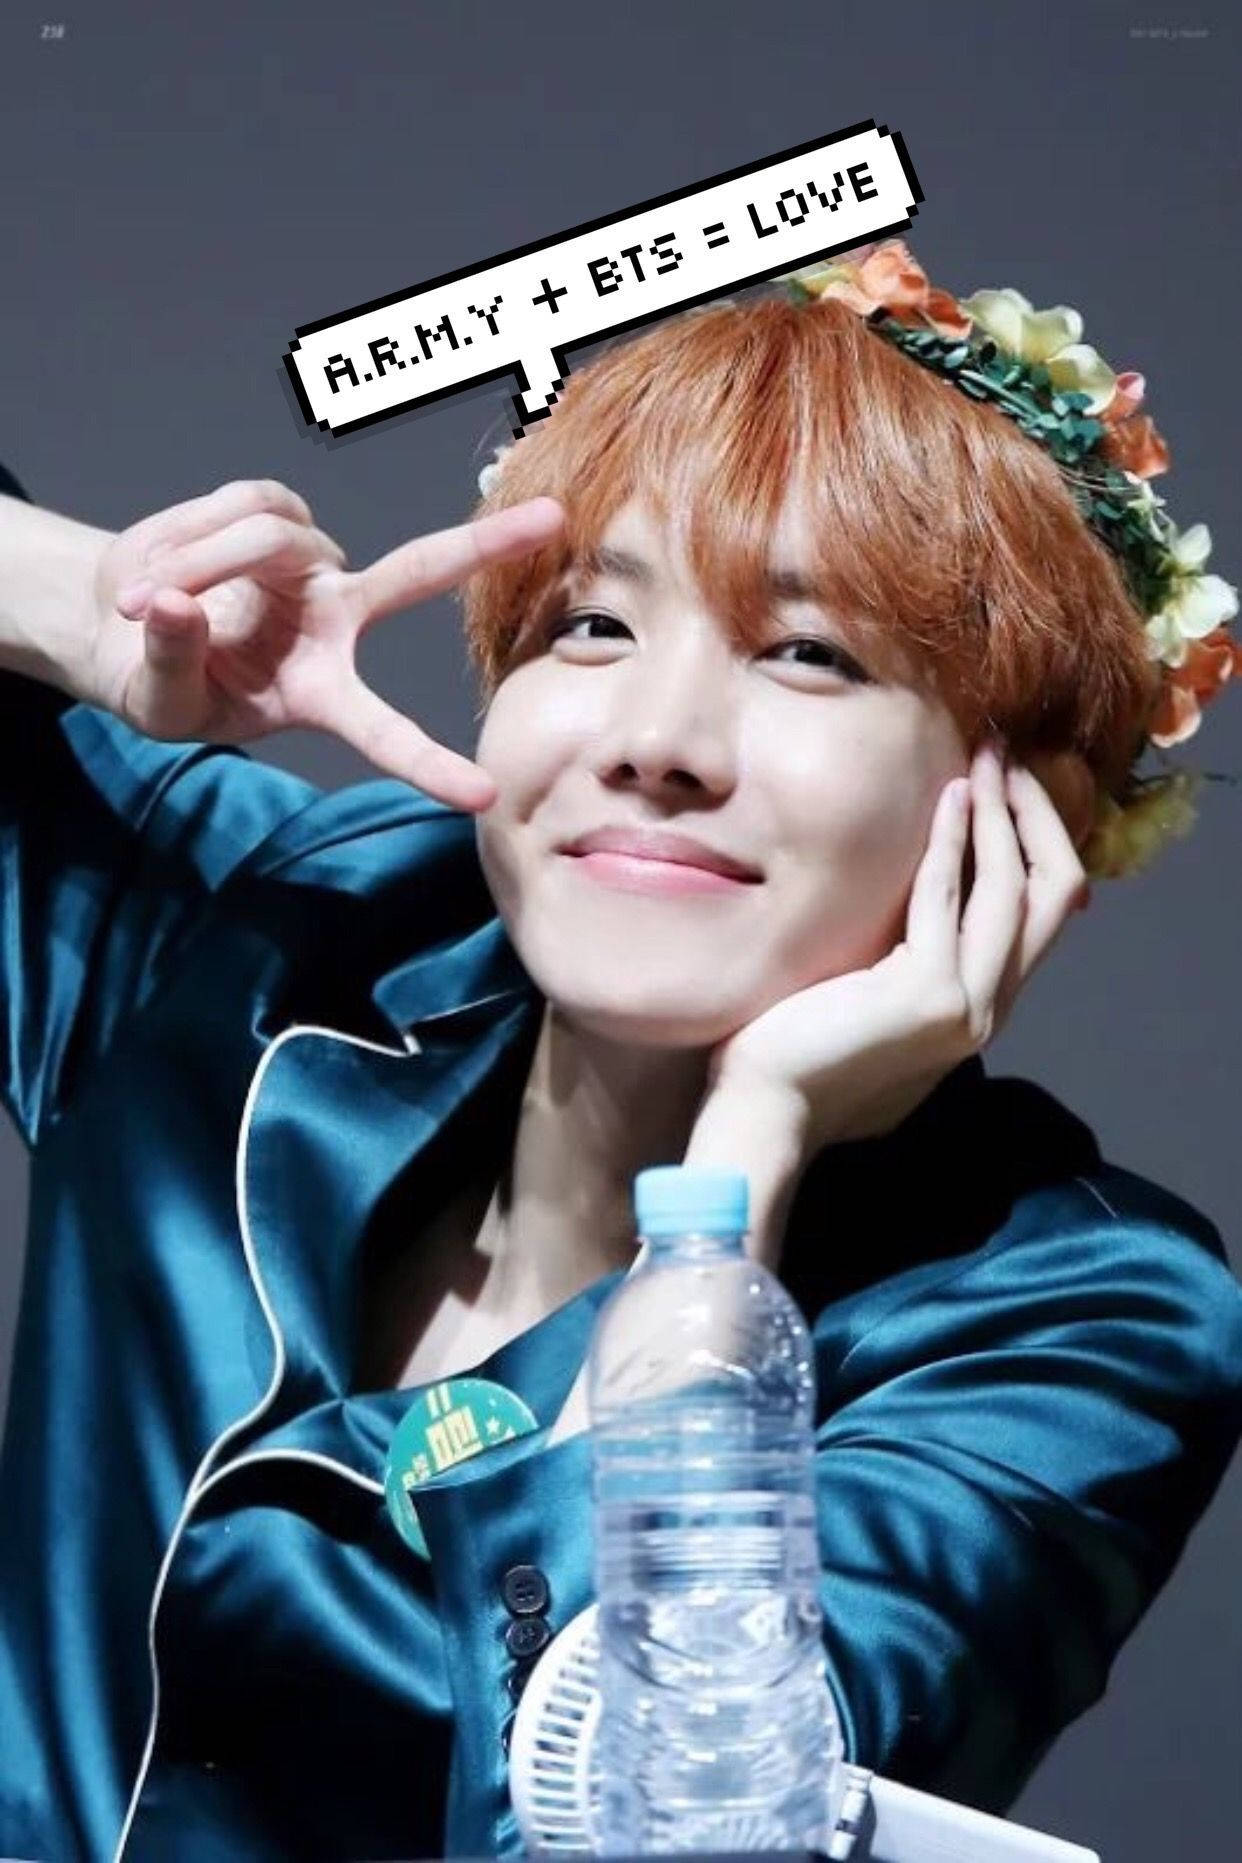 Jhope Cute Peace Sign Background